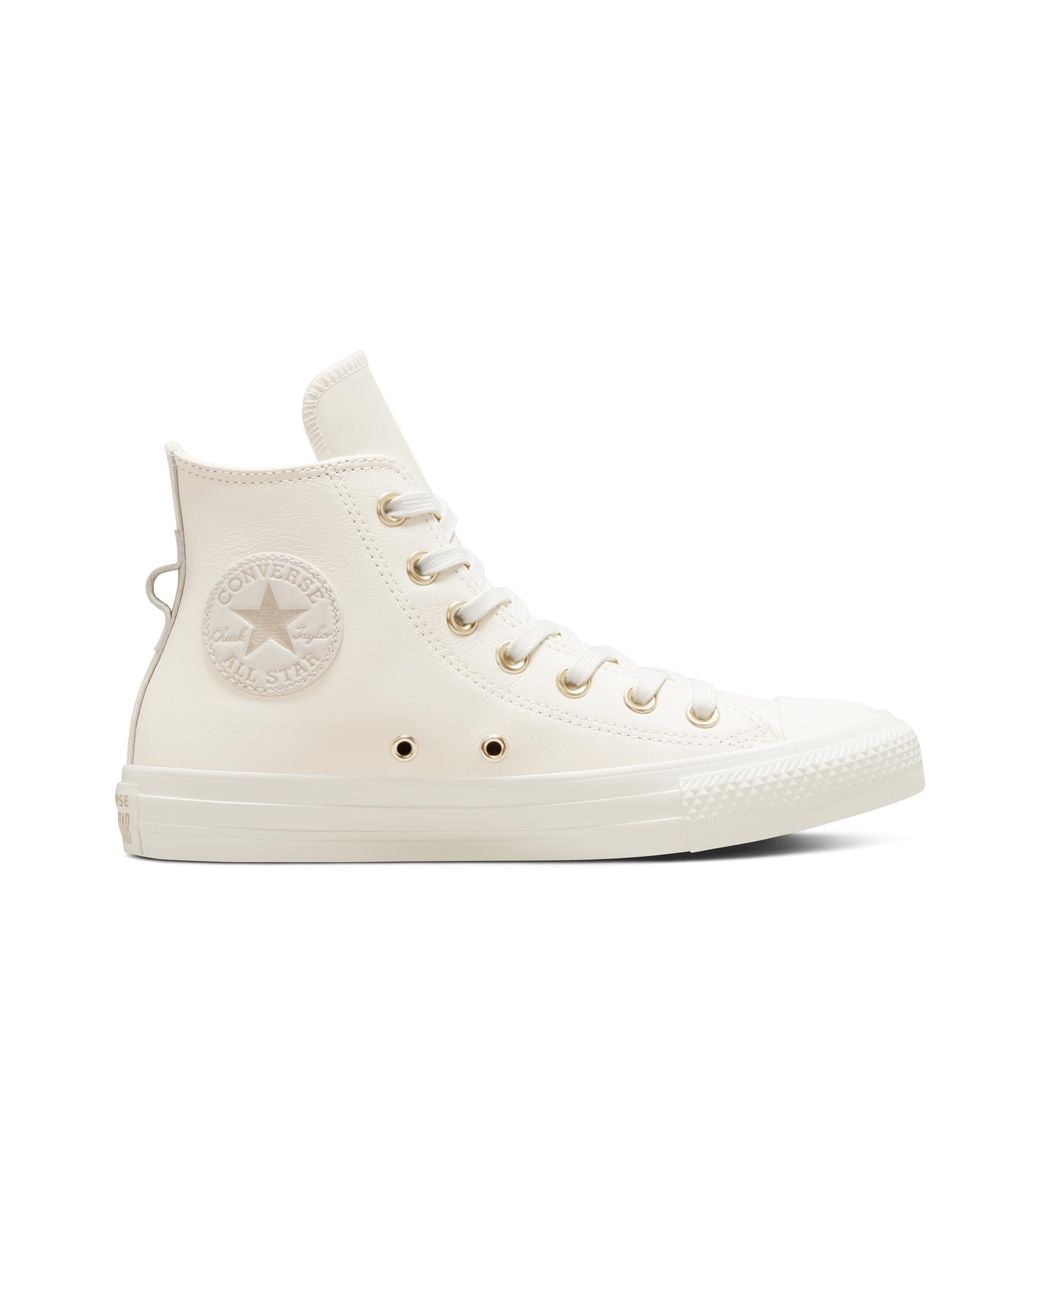 Converse Earthy Tones Chuck Taylor All Star in White | Lyst